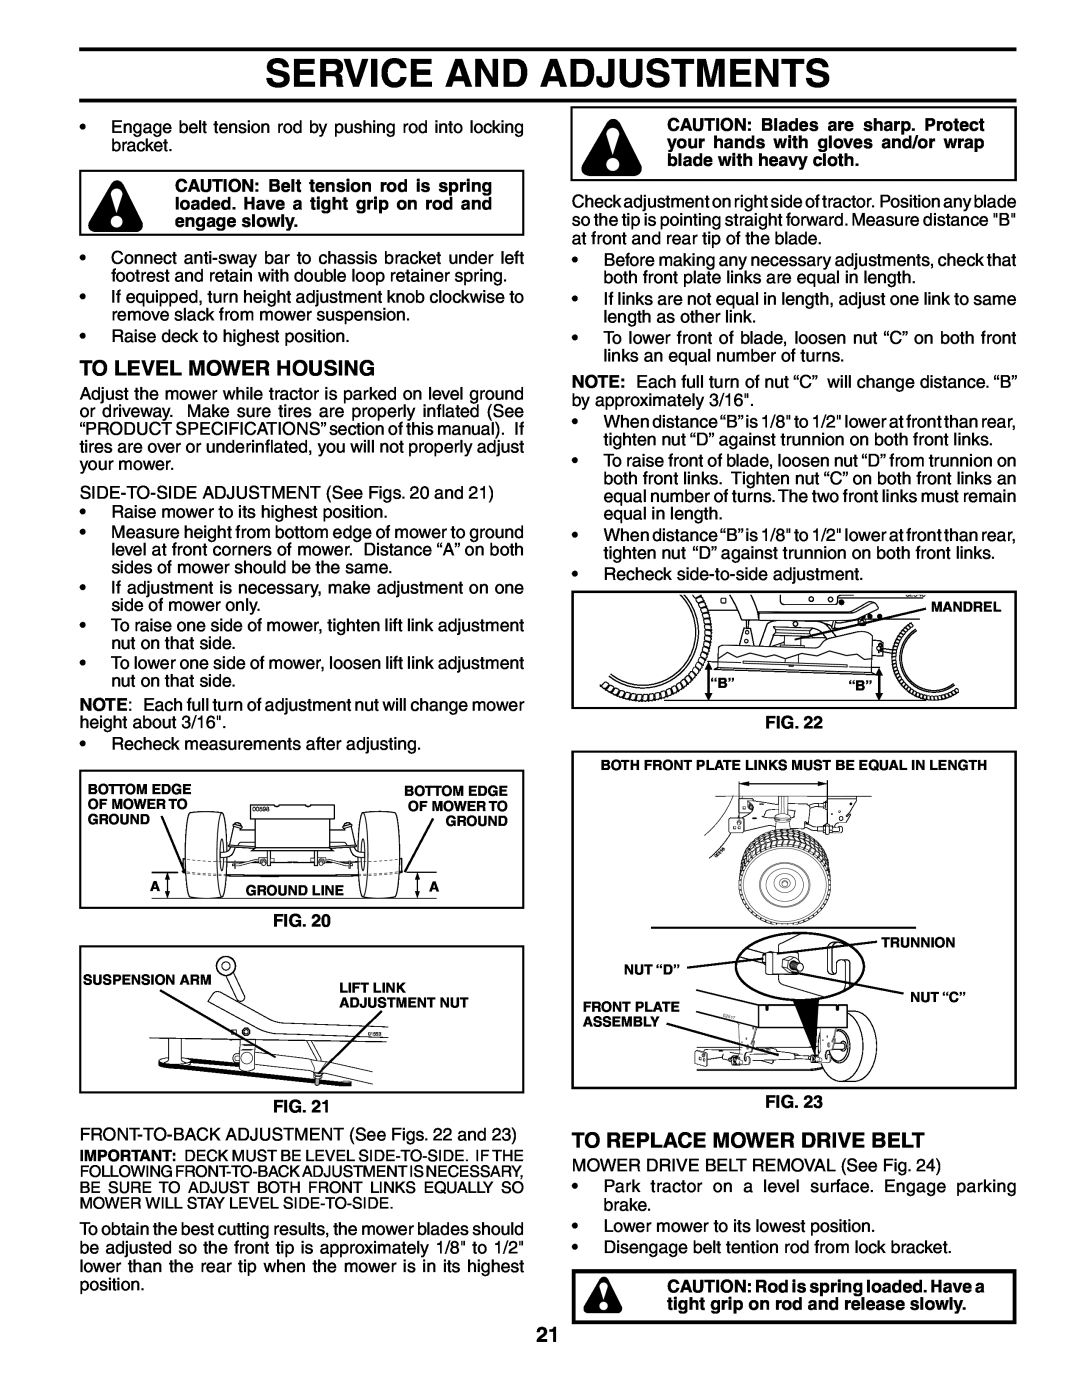 Poulan 185498, 954569516 owner manual To Level Mower Housing, To Replace Mower Drive Belt, Service And Adjustments 